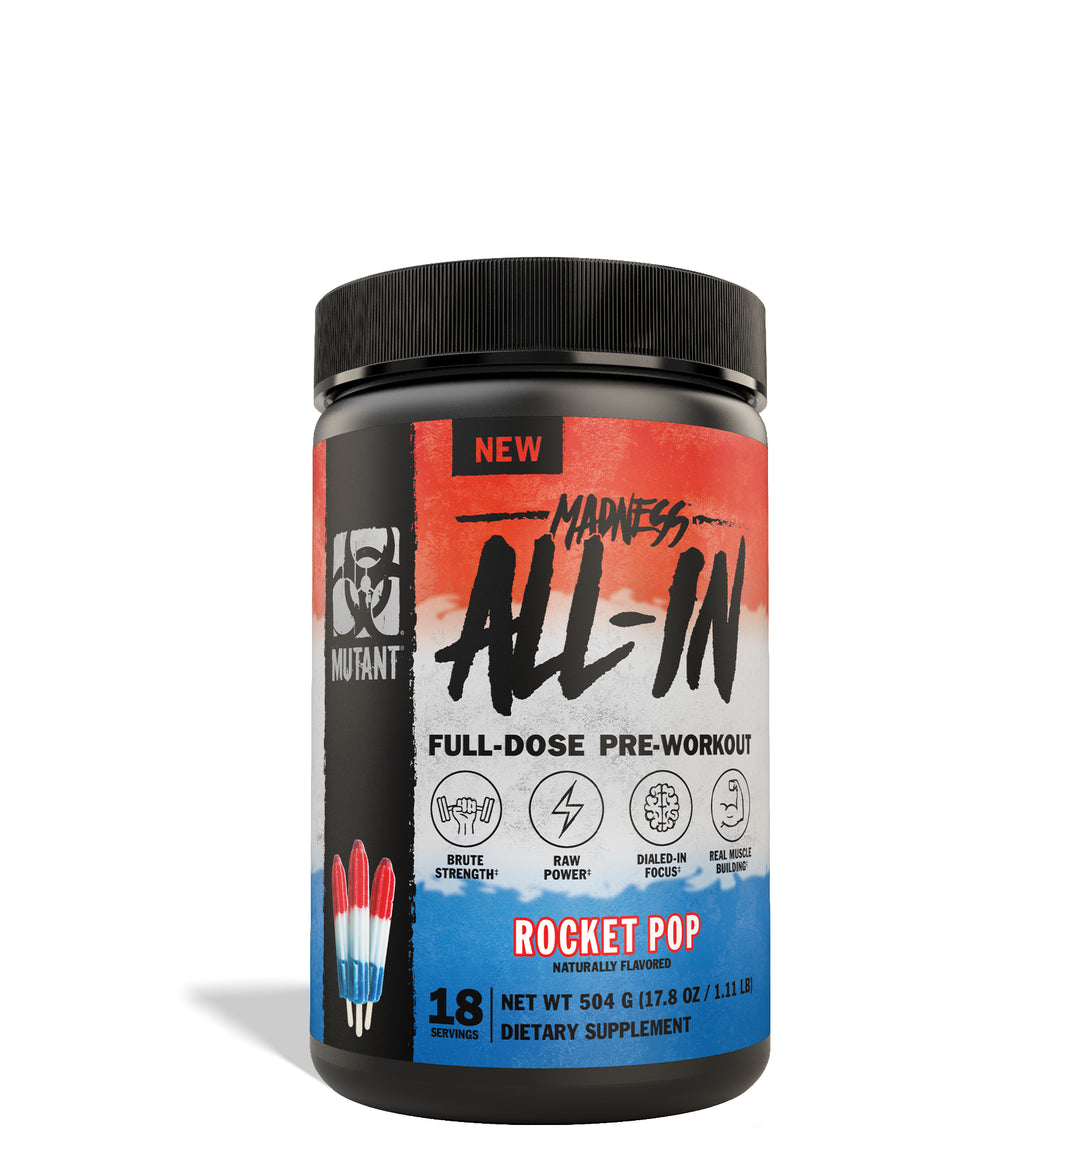 MADNESS ALL-IN - Full-Dose Pre-Workout